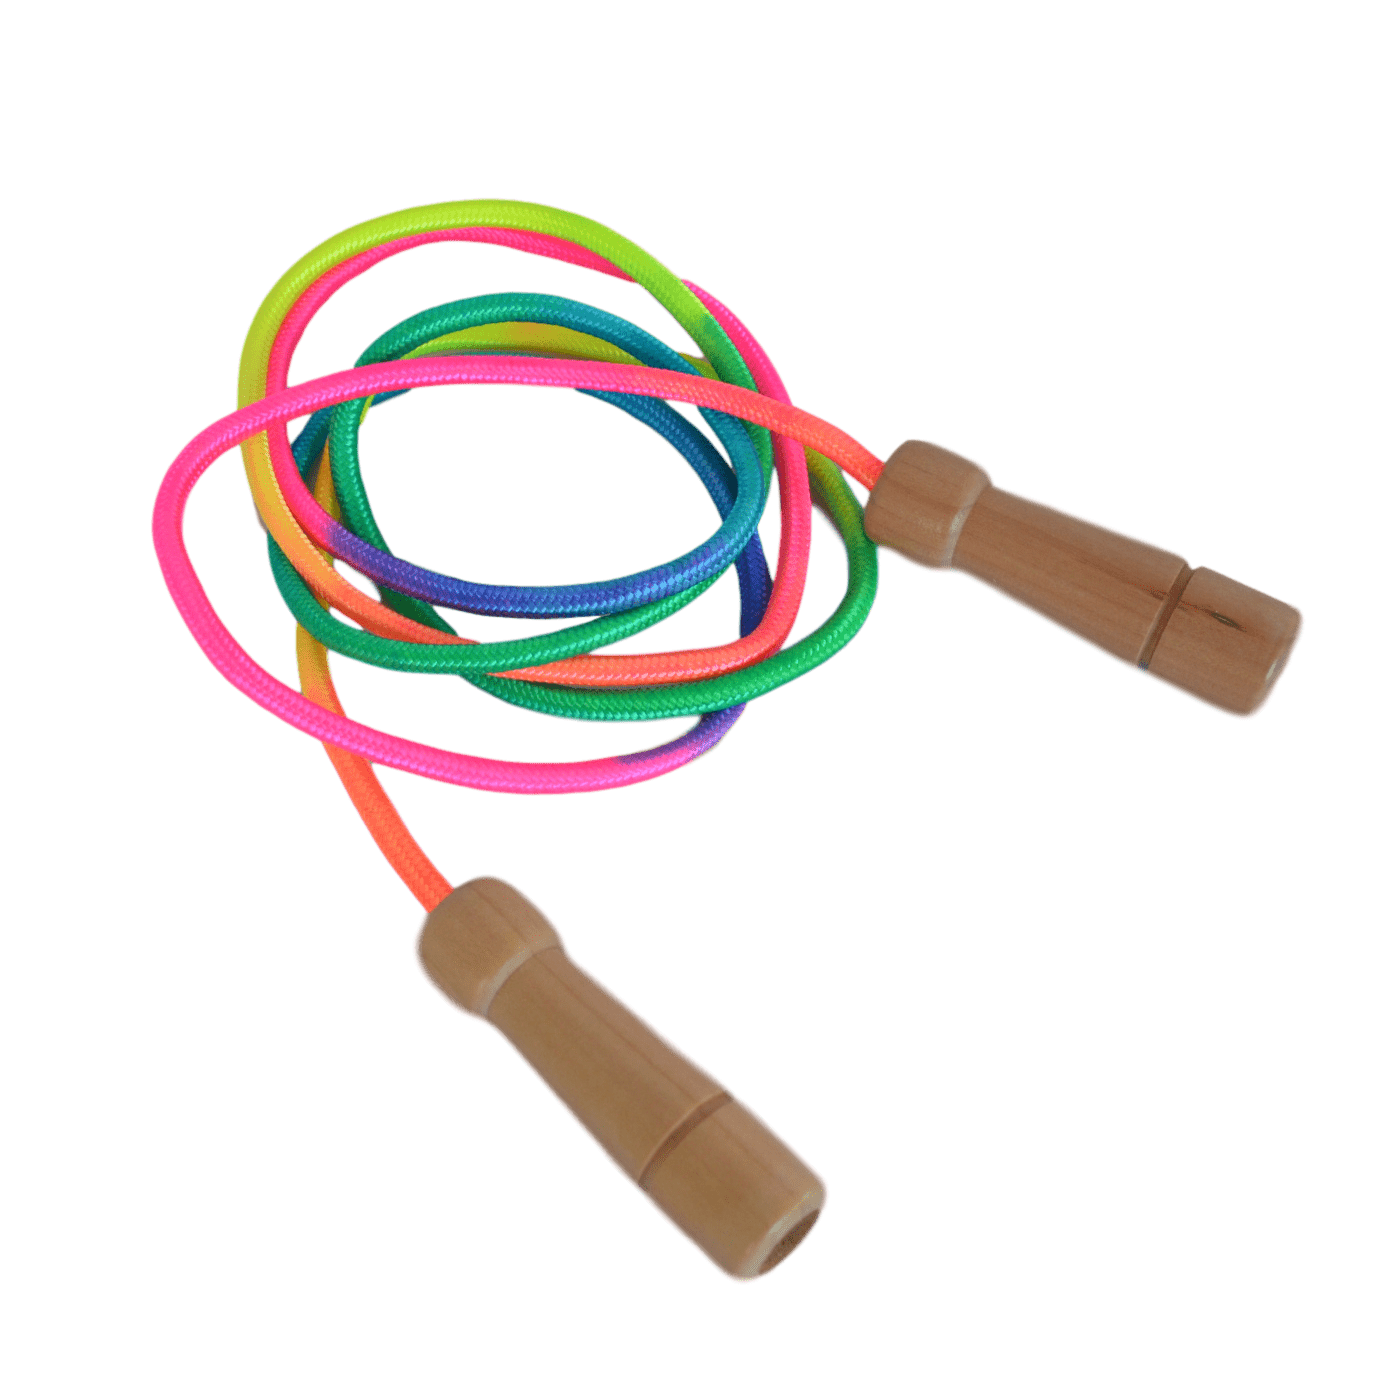 Daju Skipping Rope for Kids - Pack of 2 - Adjustable Length with